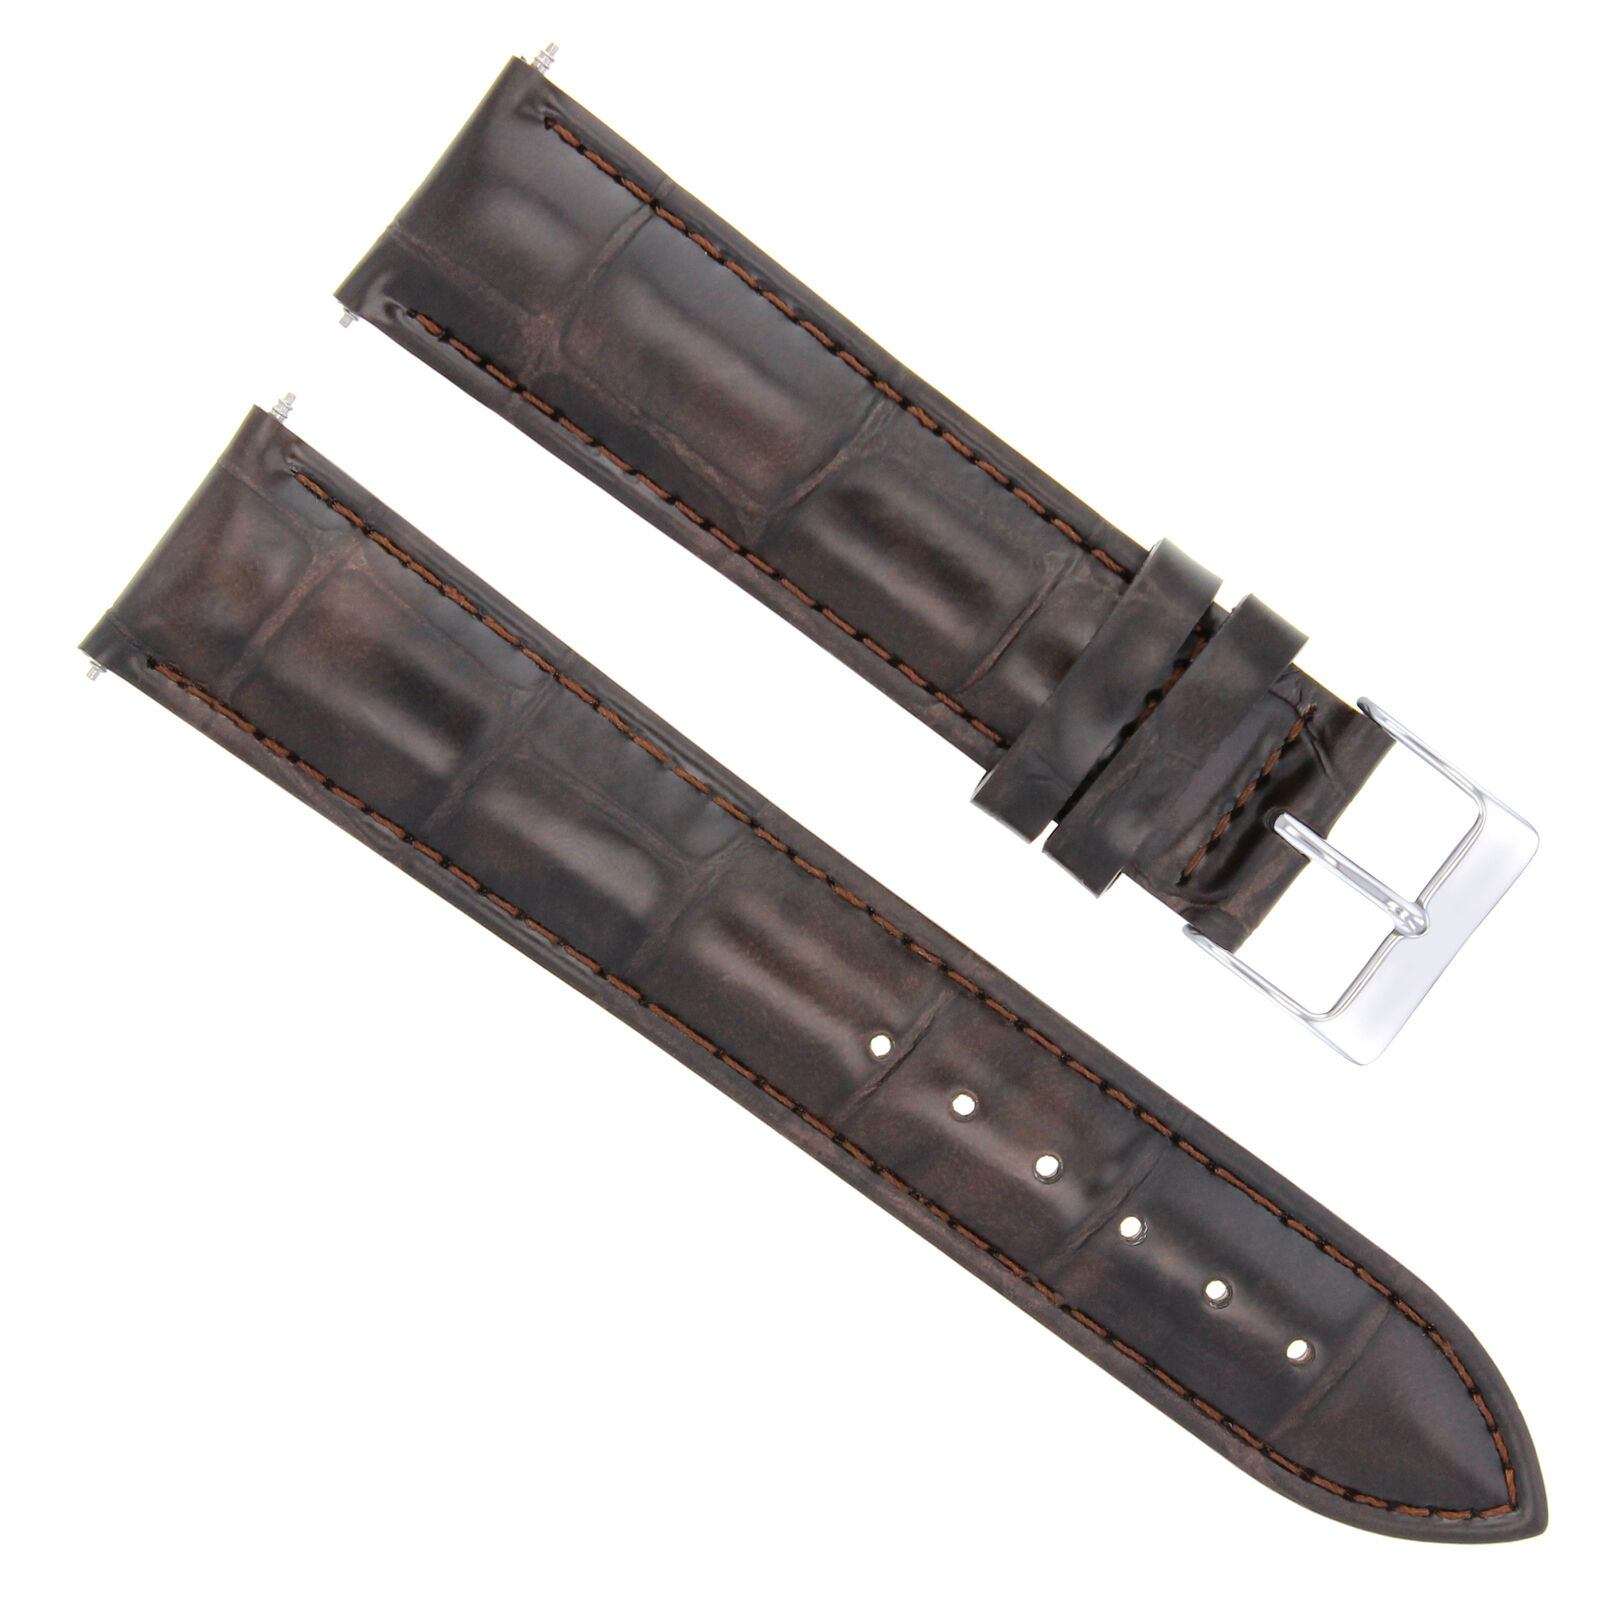 22MM ITALIAN LEATHER WATCH STRAP BAND FOR MENS BREGUET WATCH DARK BROWN